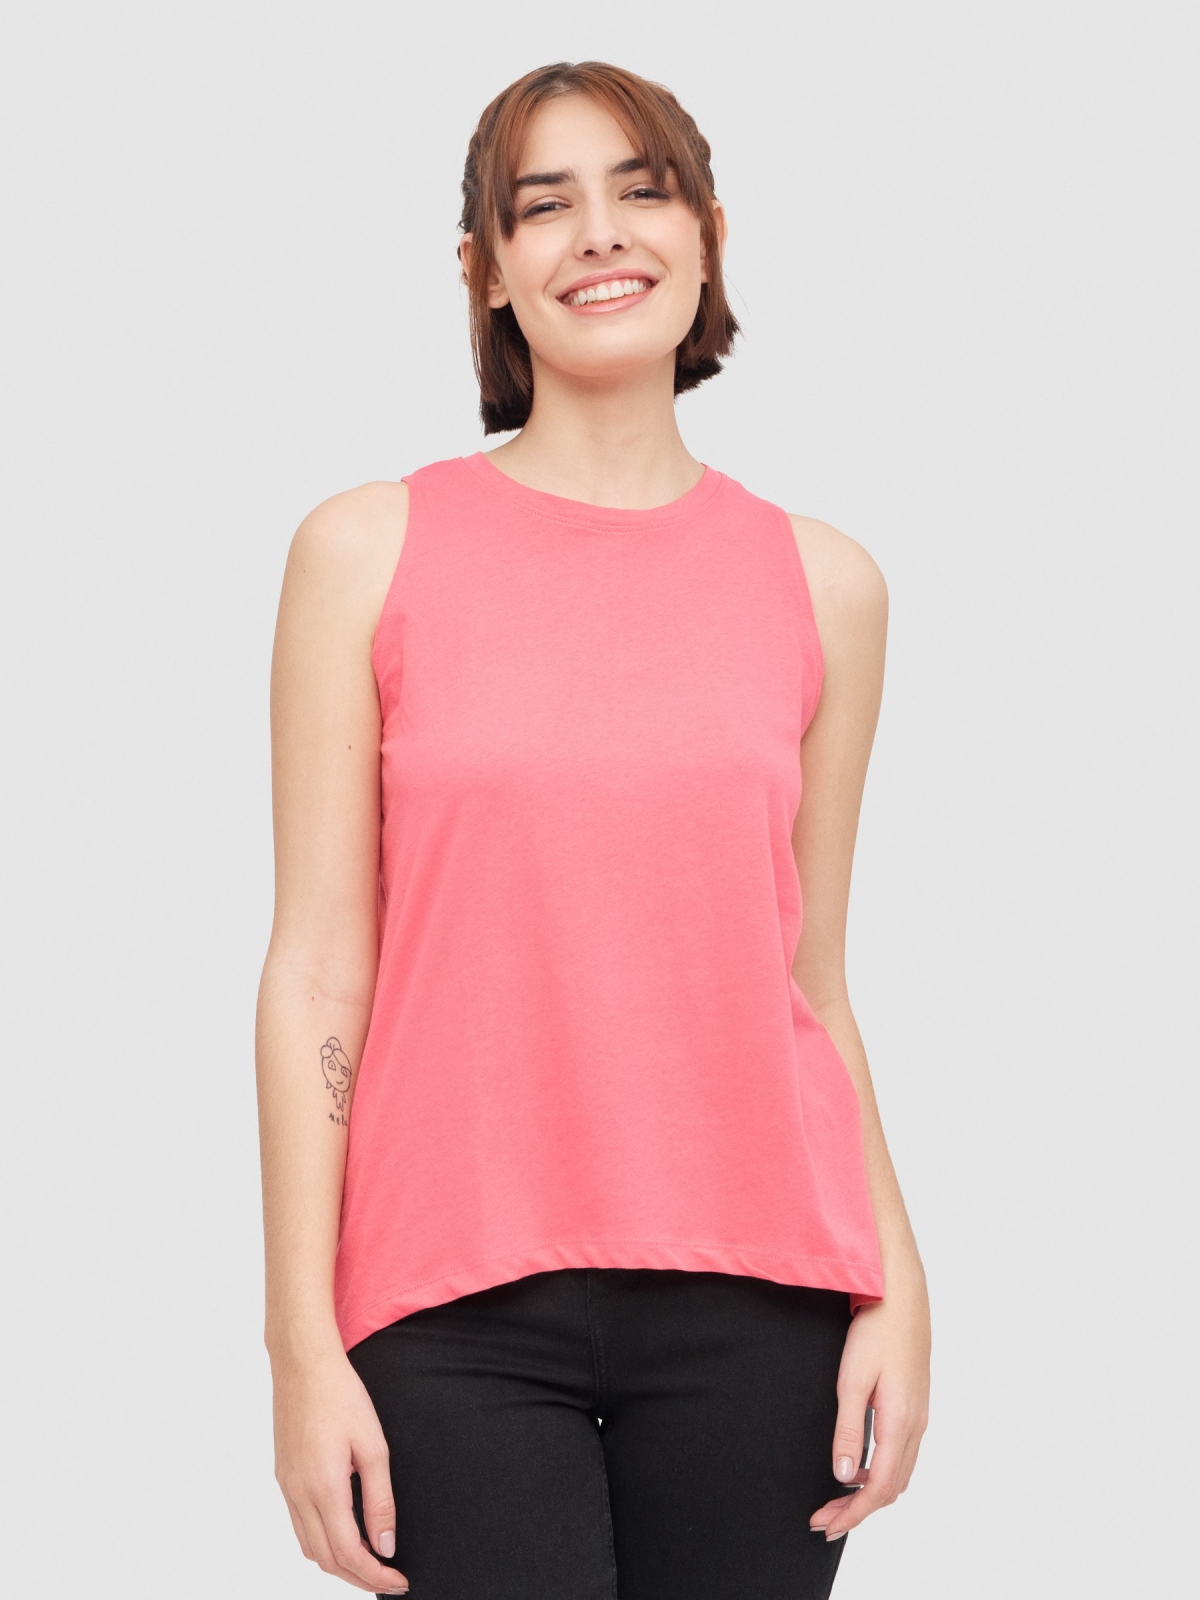 T-shirt with back opening pink middle front view